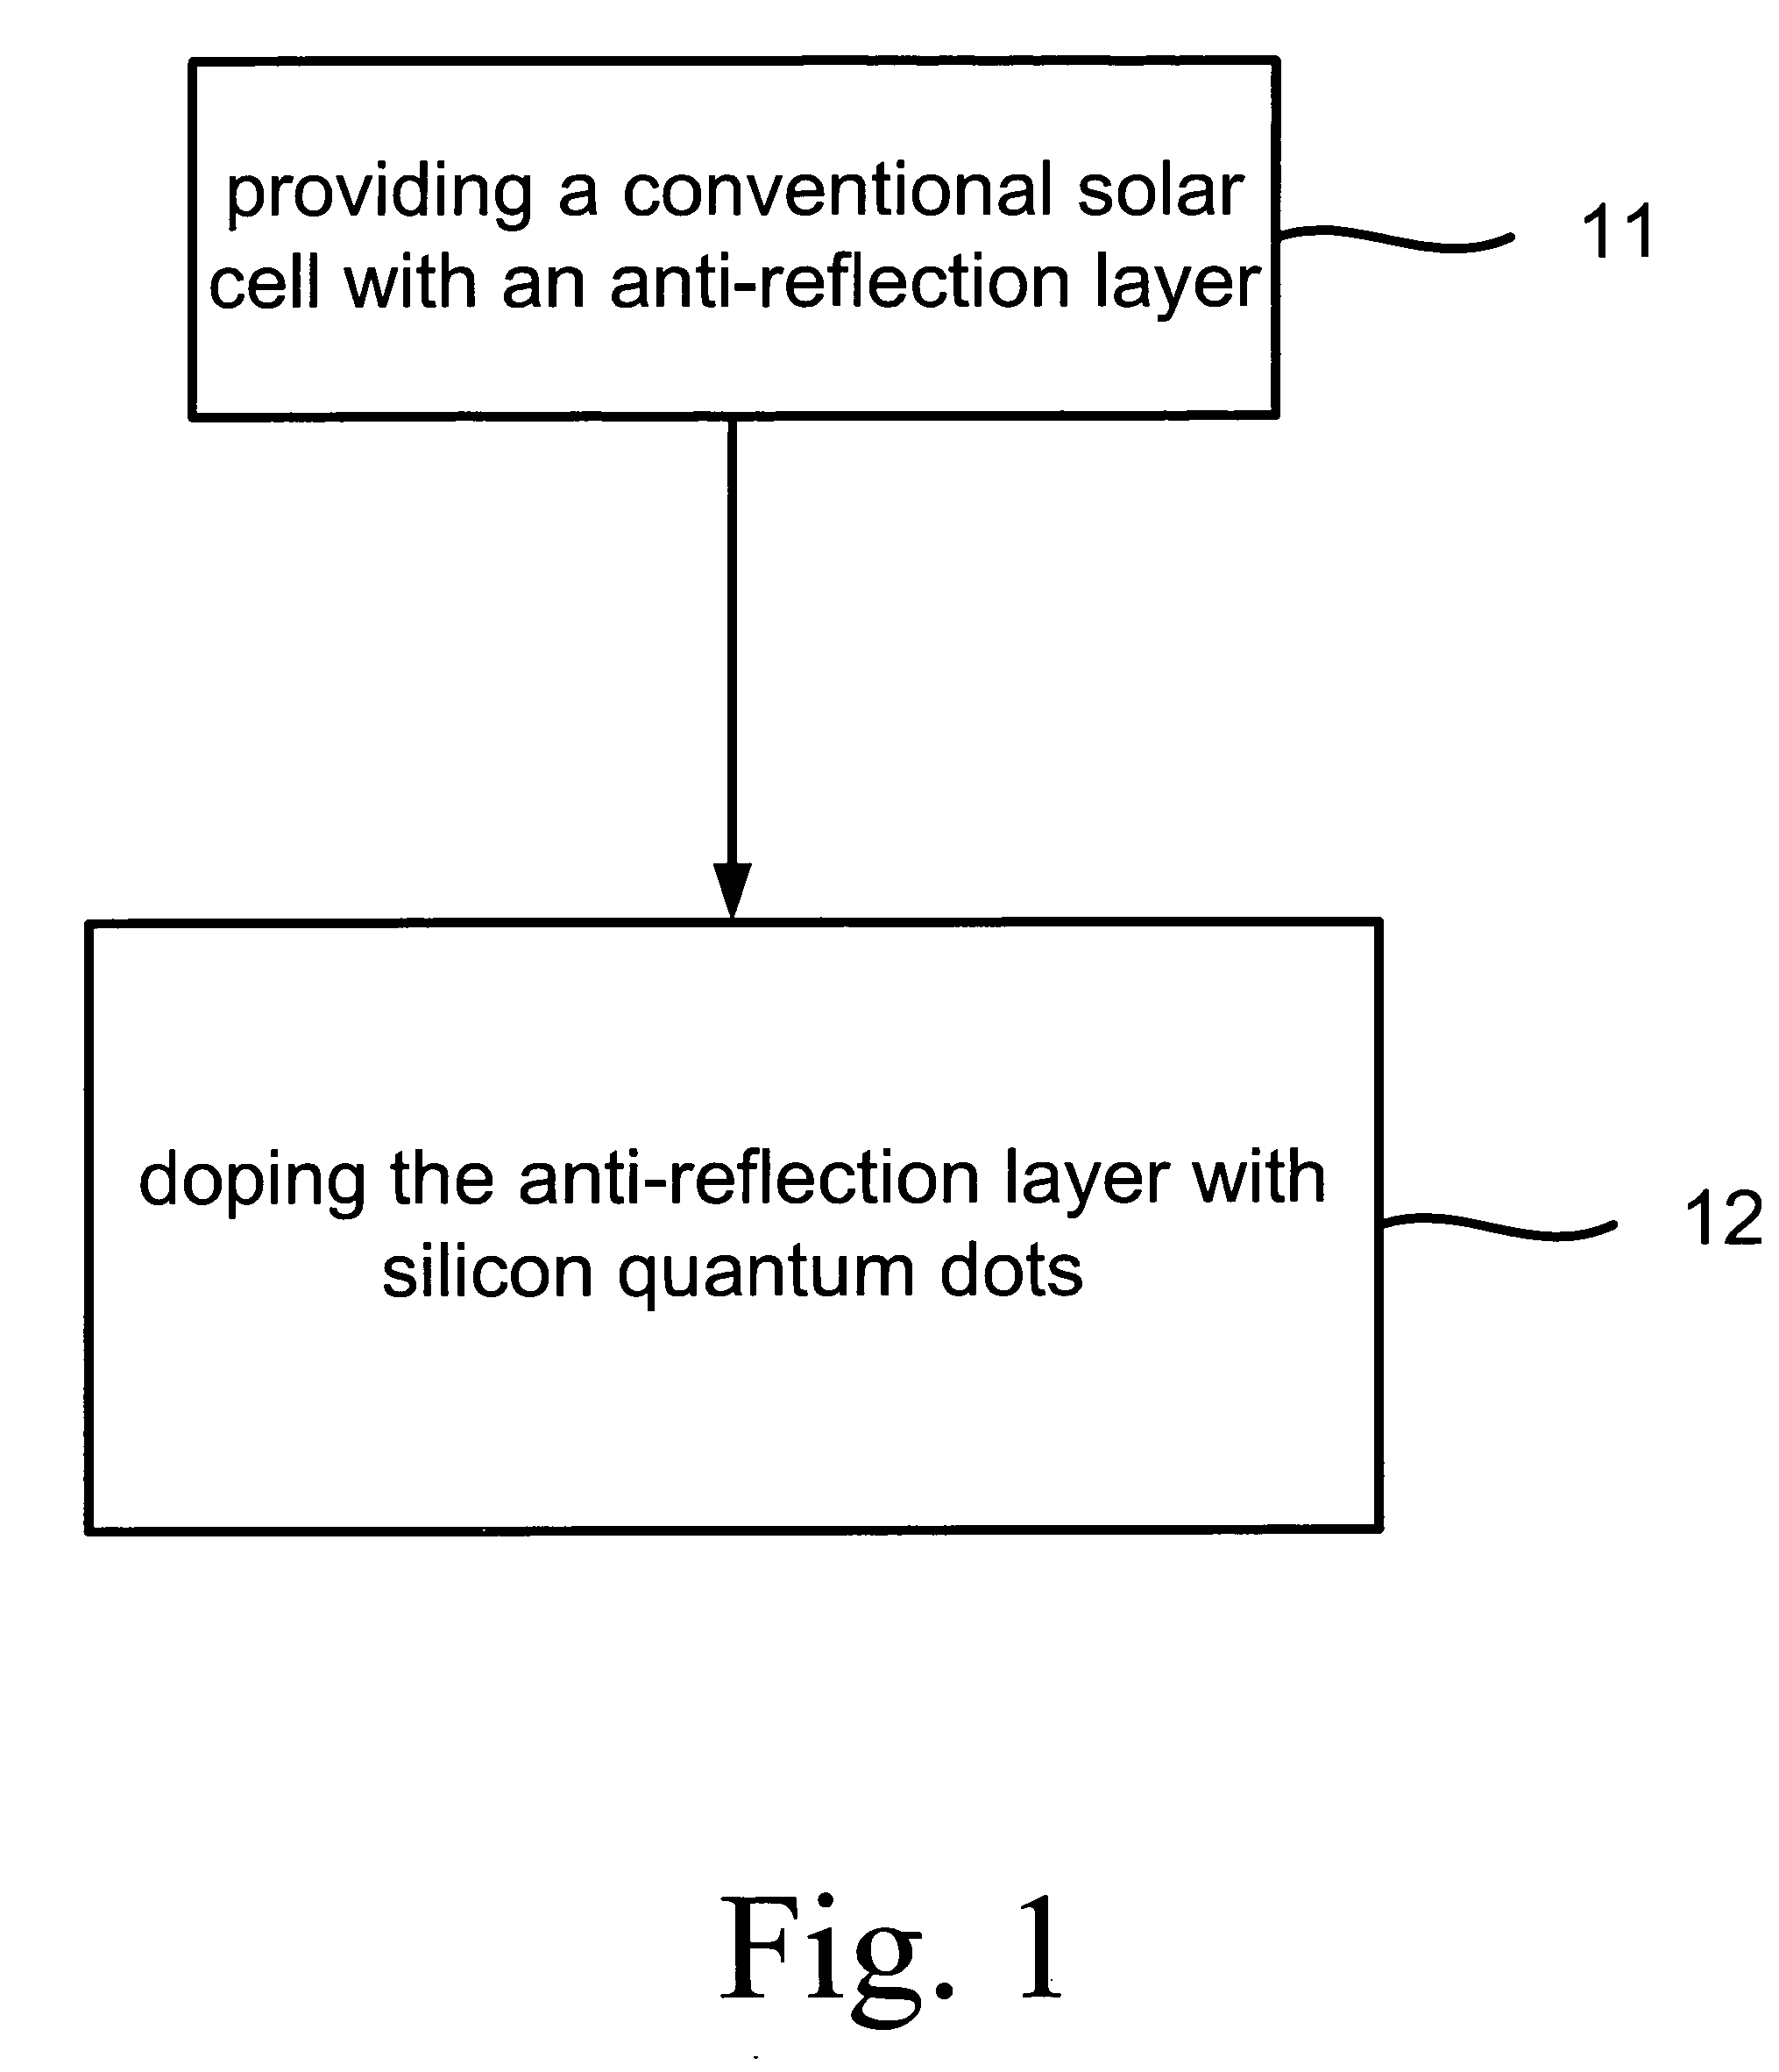 Method for making a full-spectrum solar cell with an anti-reflection layer doped with silicon quantum dots